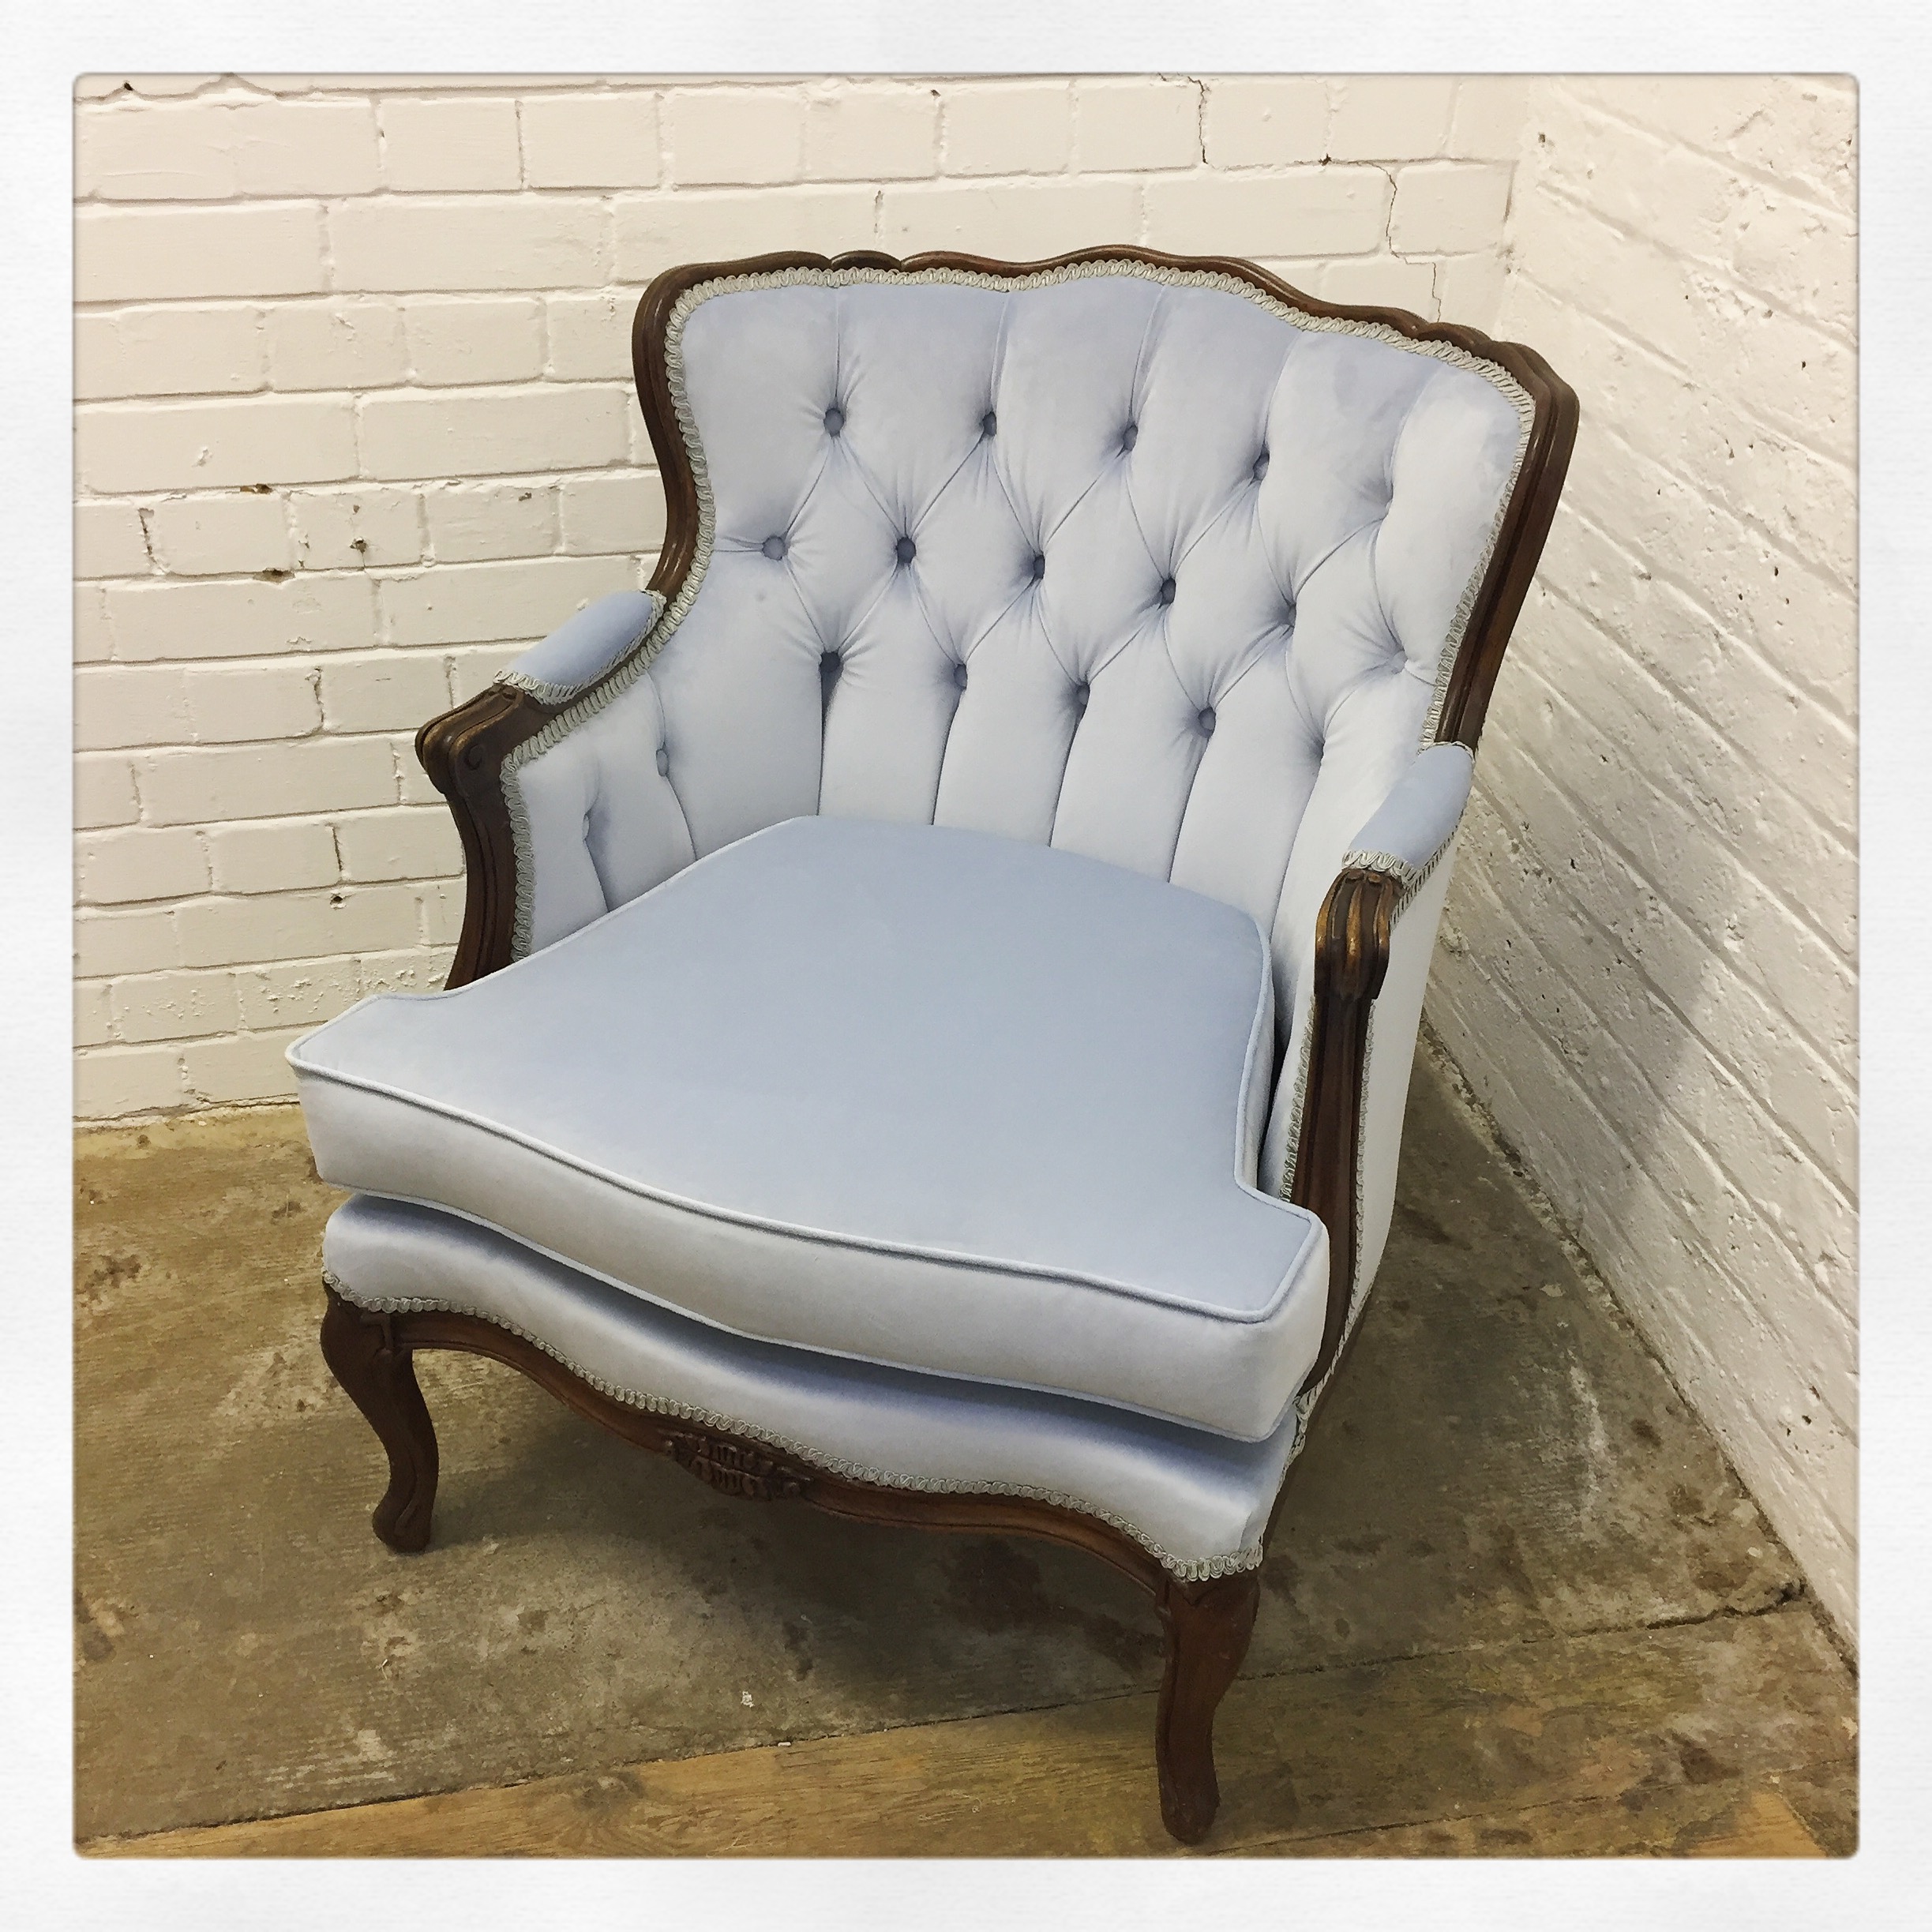 Antique Chair Upholstery in Light Blue Fabric